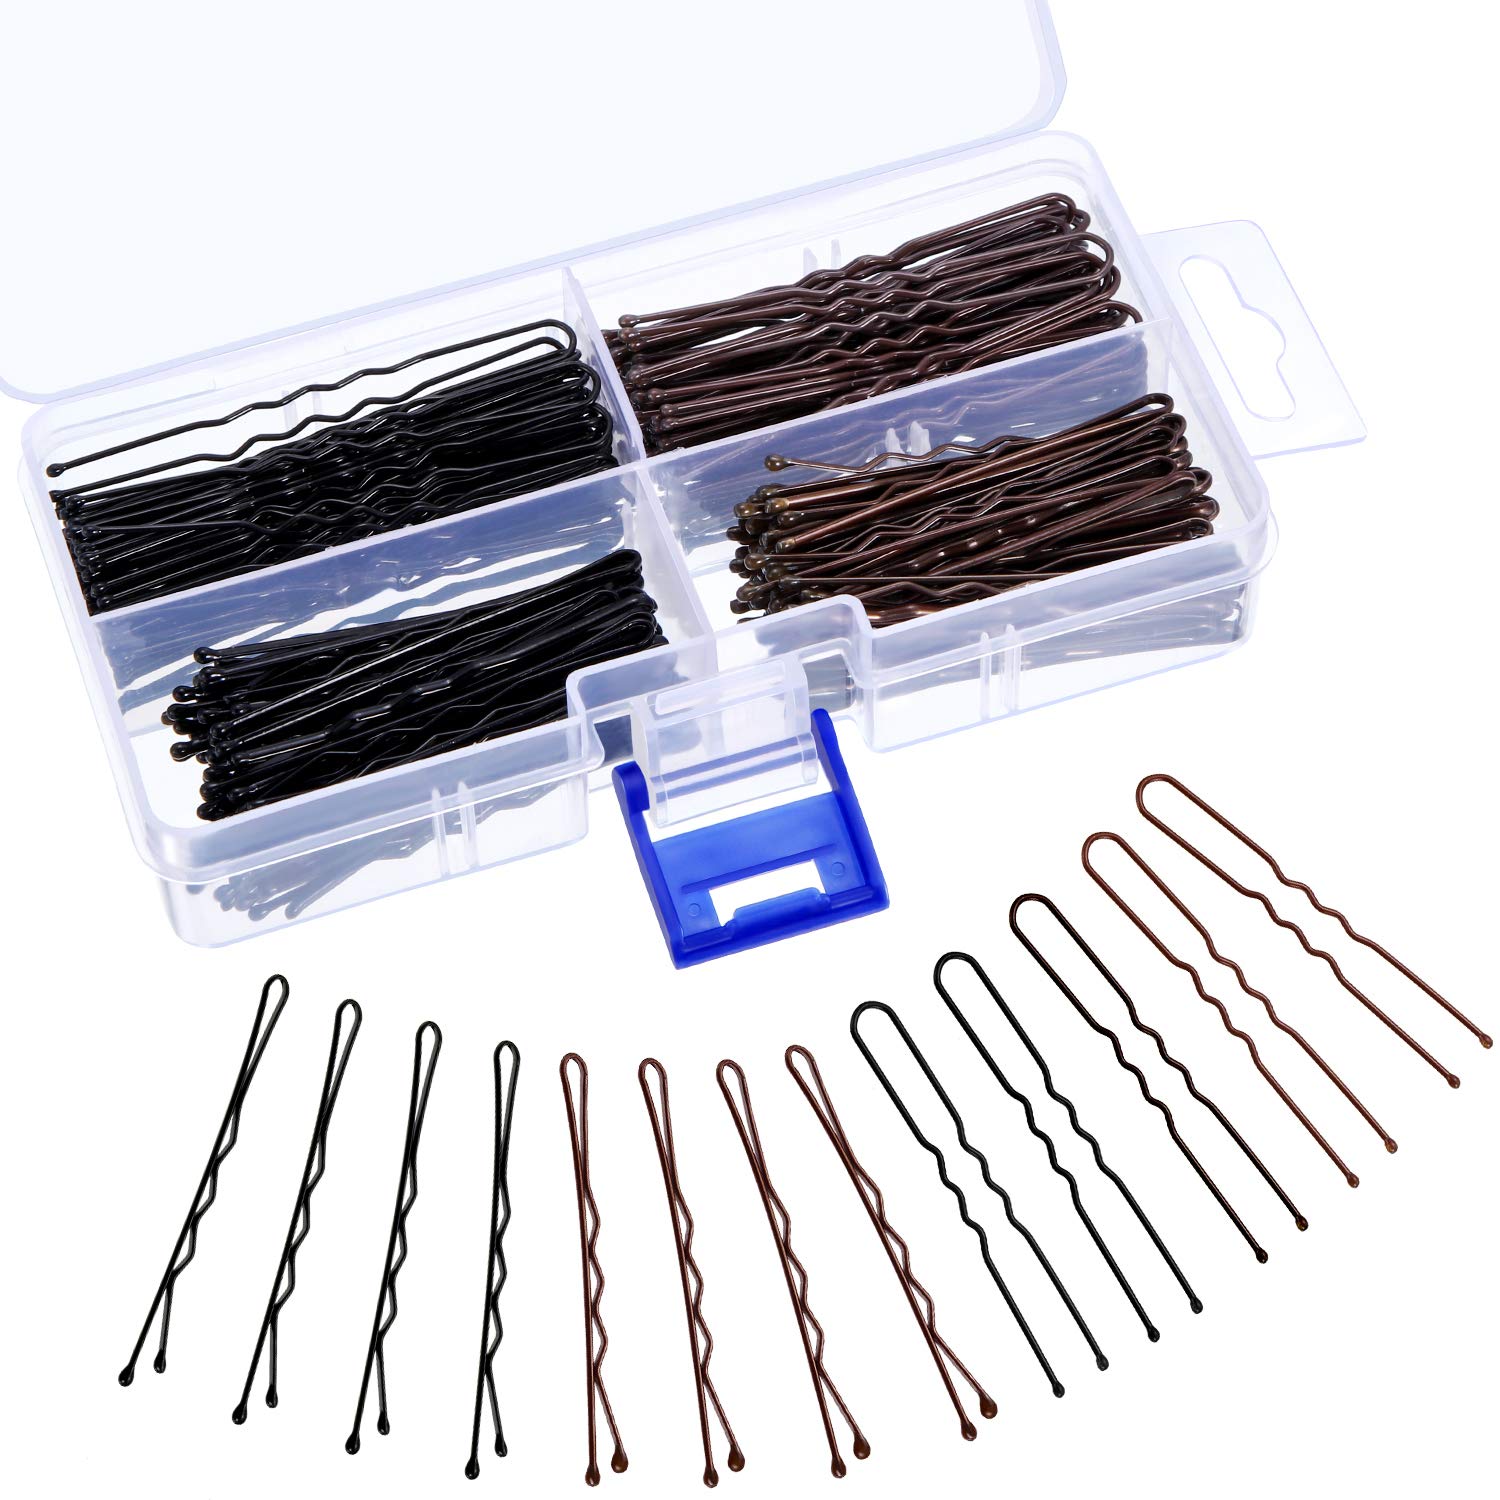 Hicarer 200 Pieces Hair Pins Bobby Pins U Shaped Hair Clips Metal Hair Pin  Clip in Different Sizes with Clear Storage Box Black and Brown